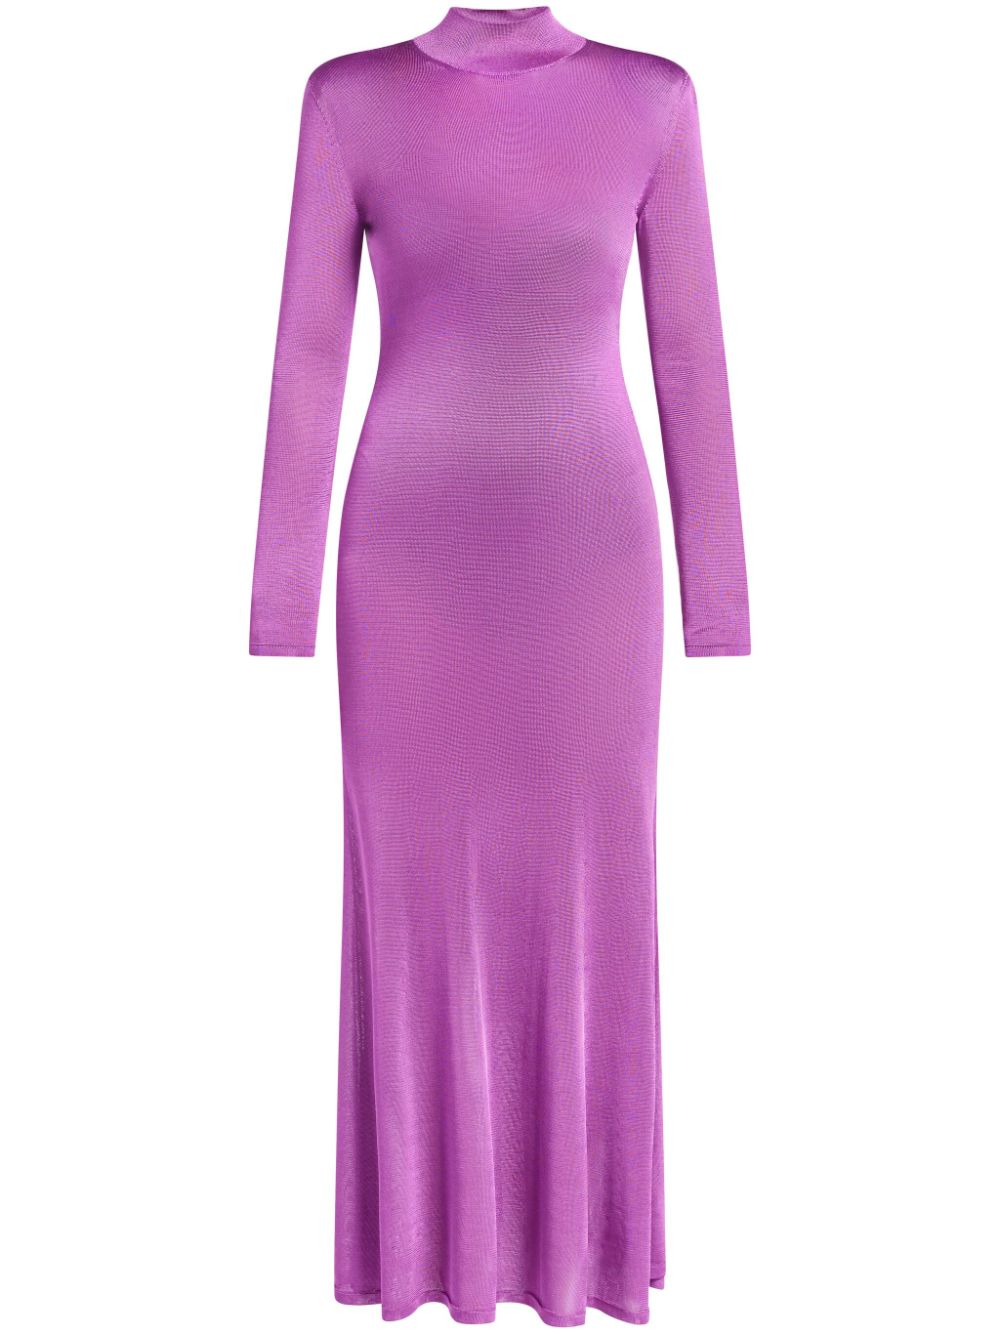 TOM FORD knitted jersey maxi dress - Pink von TOM FORD